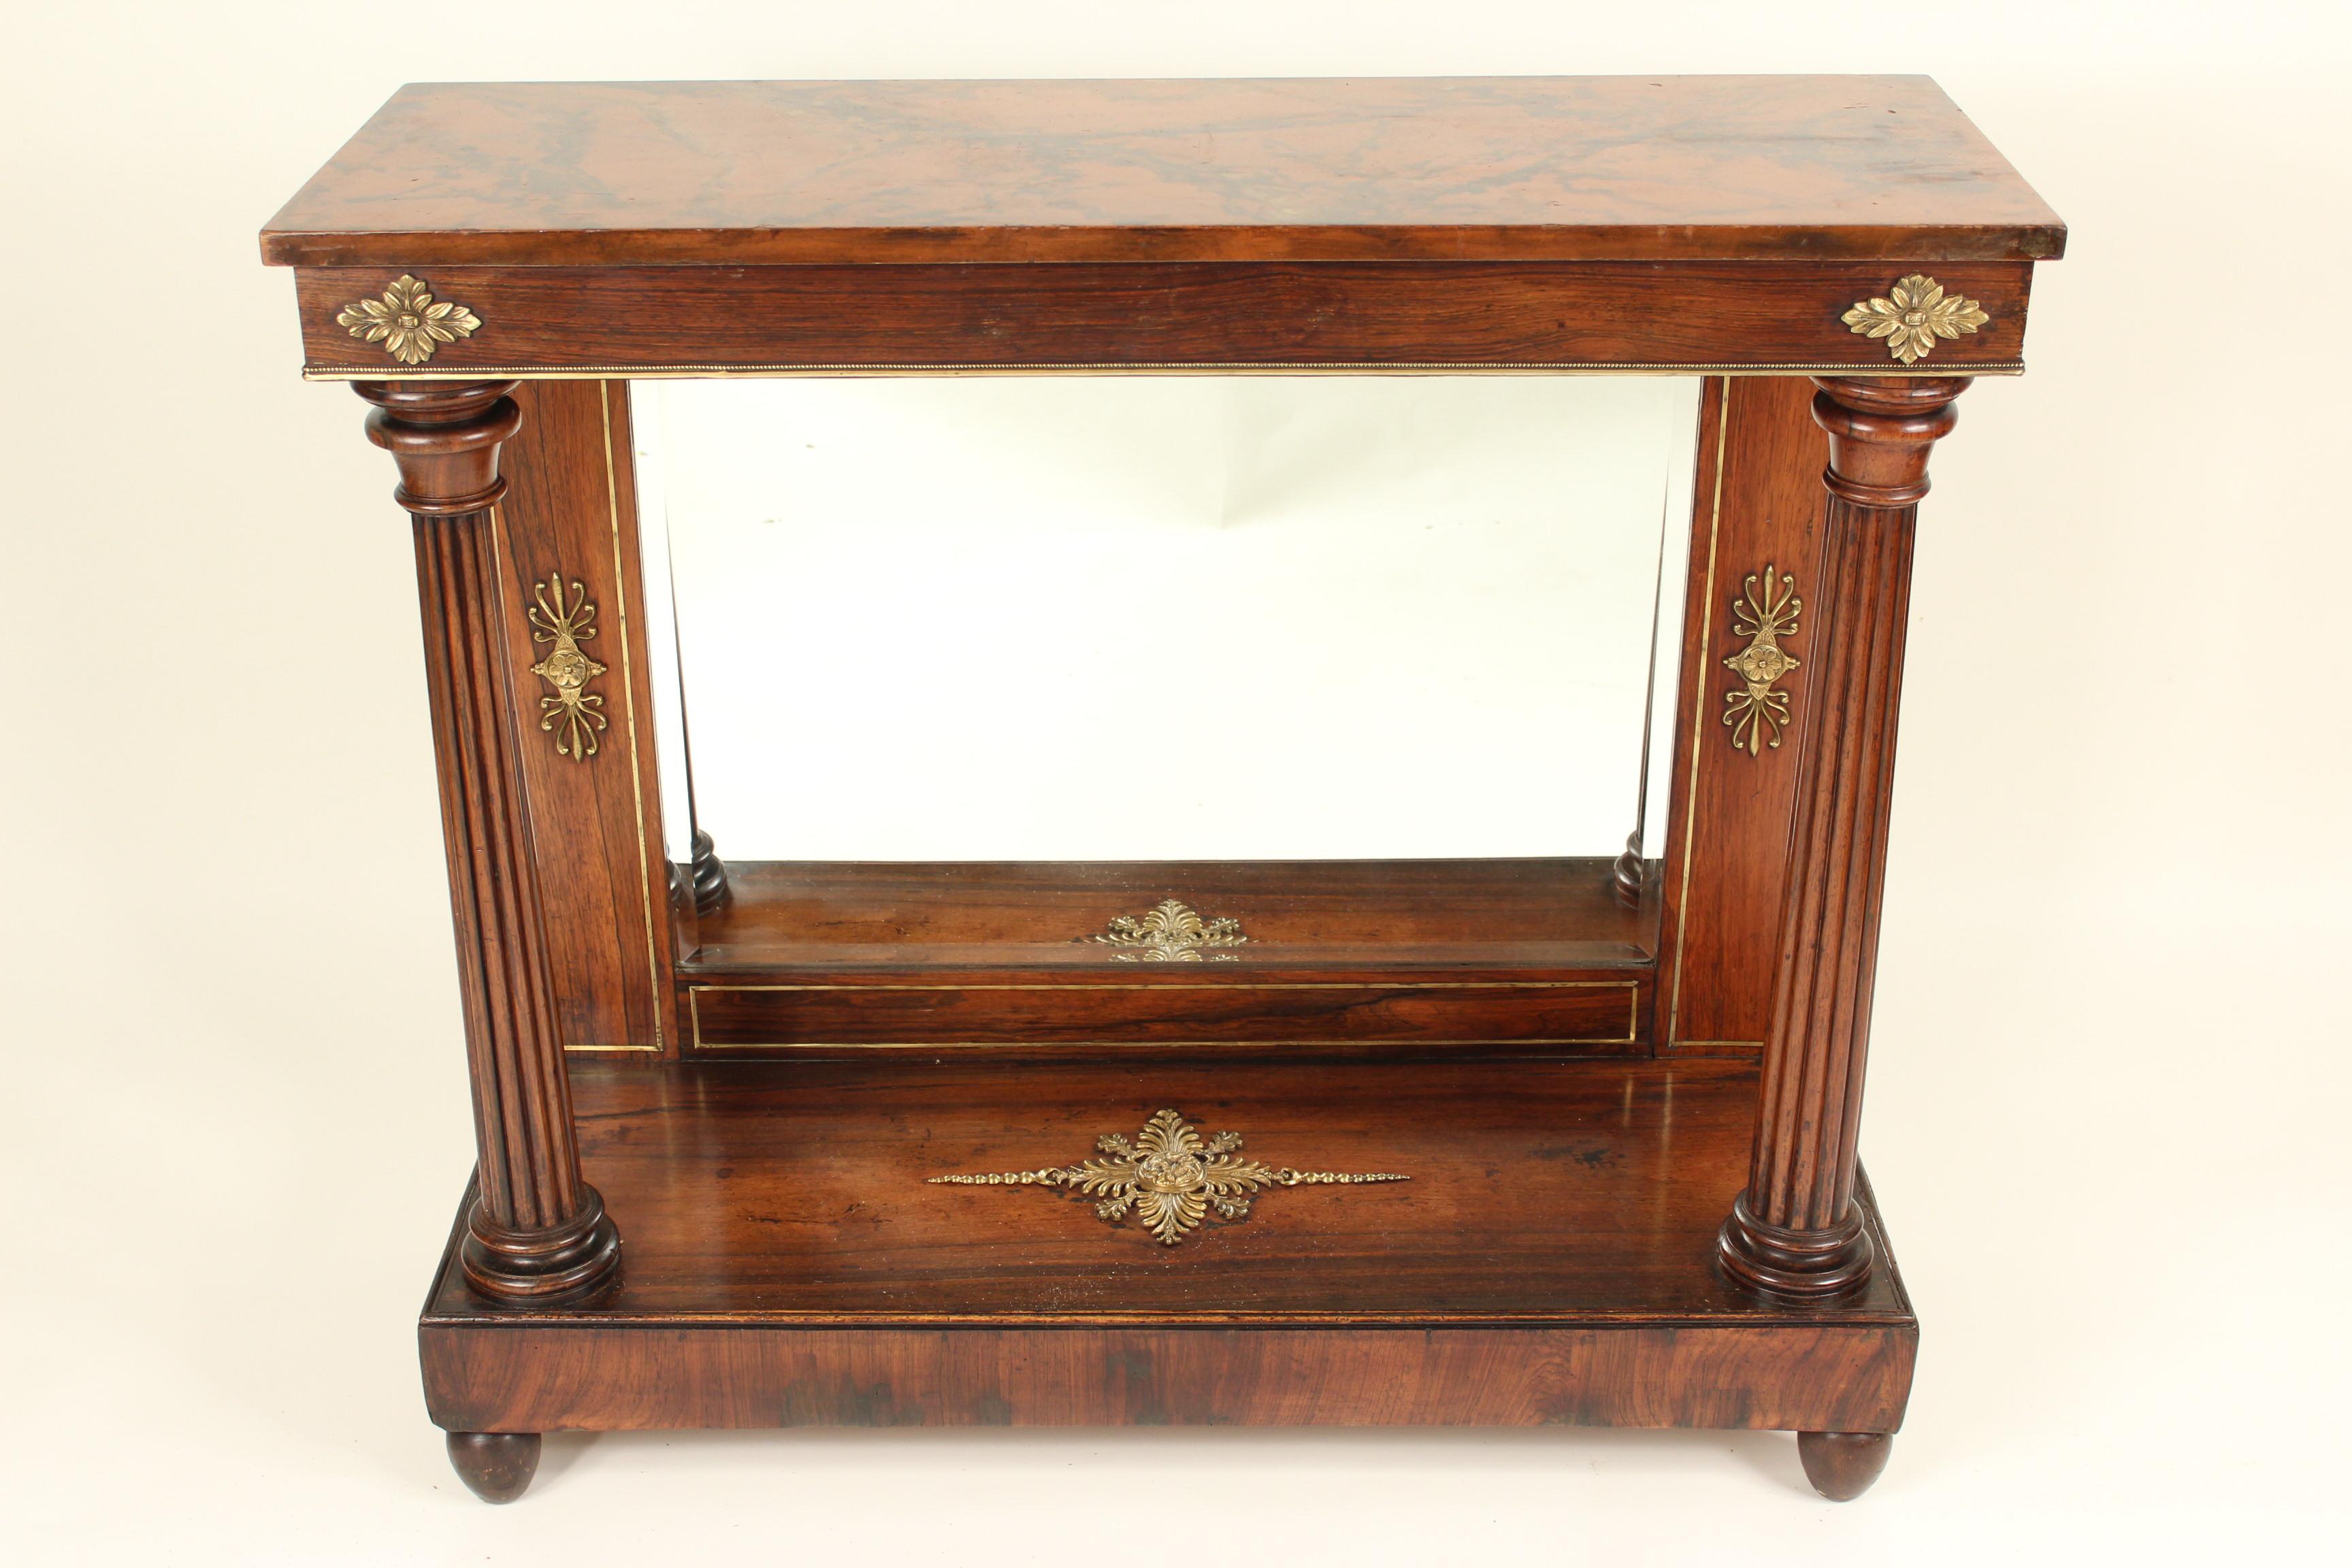 Empire bronze-mounted rosewood console table with a faux marble (wood painted to look like marble) top, circa 1820. This console table has an excellent old deep patina and robust columns. The faux marble top is later.